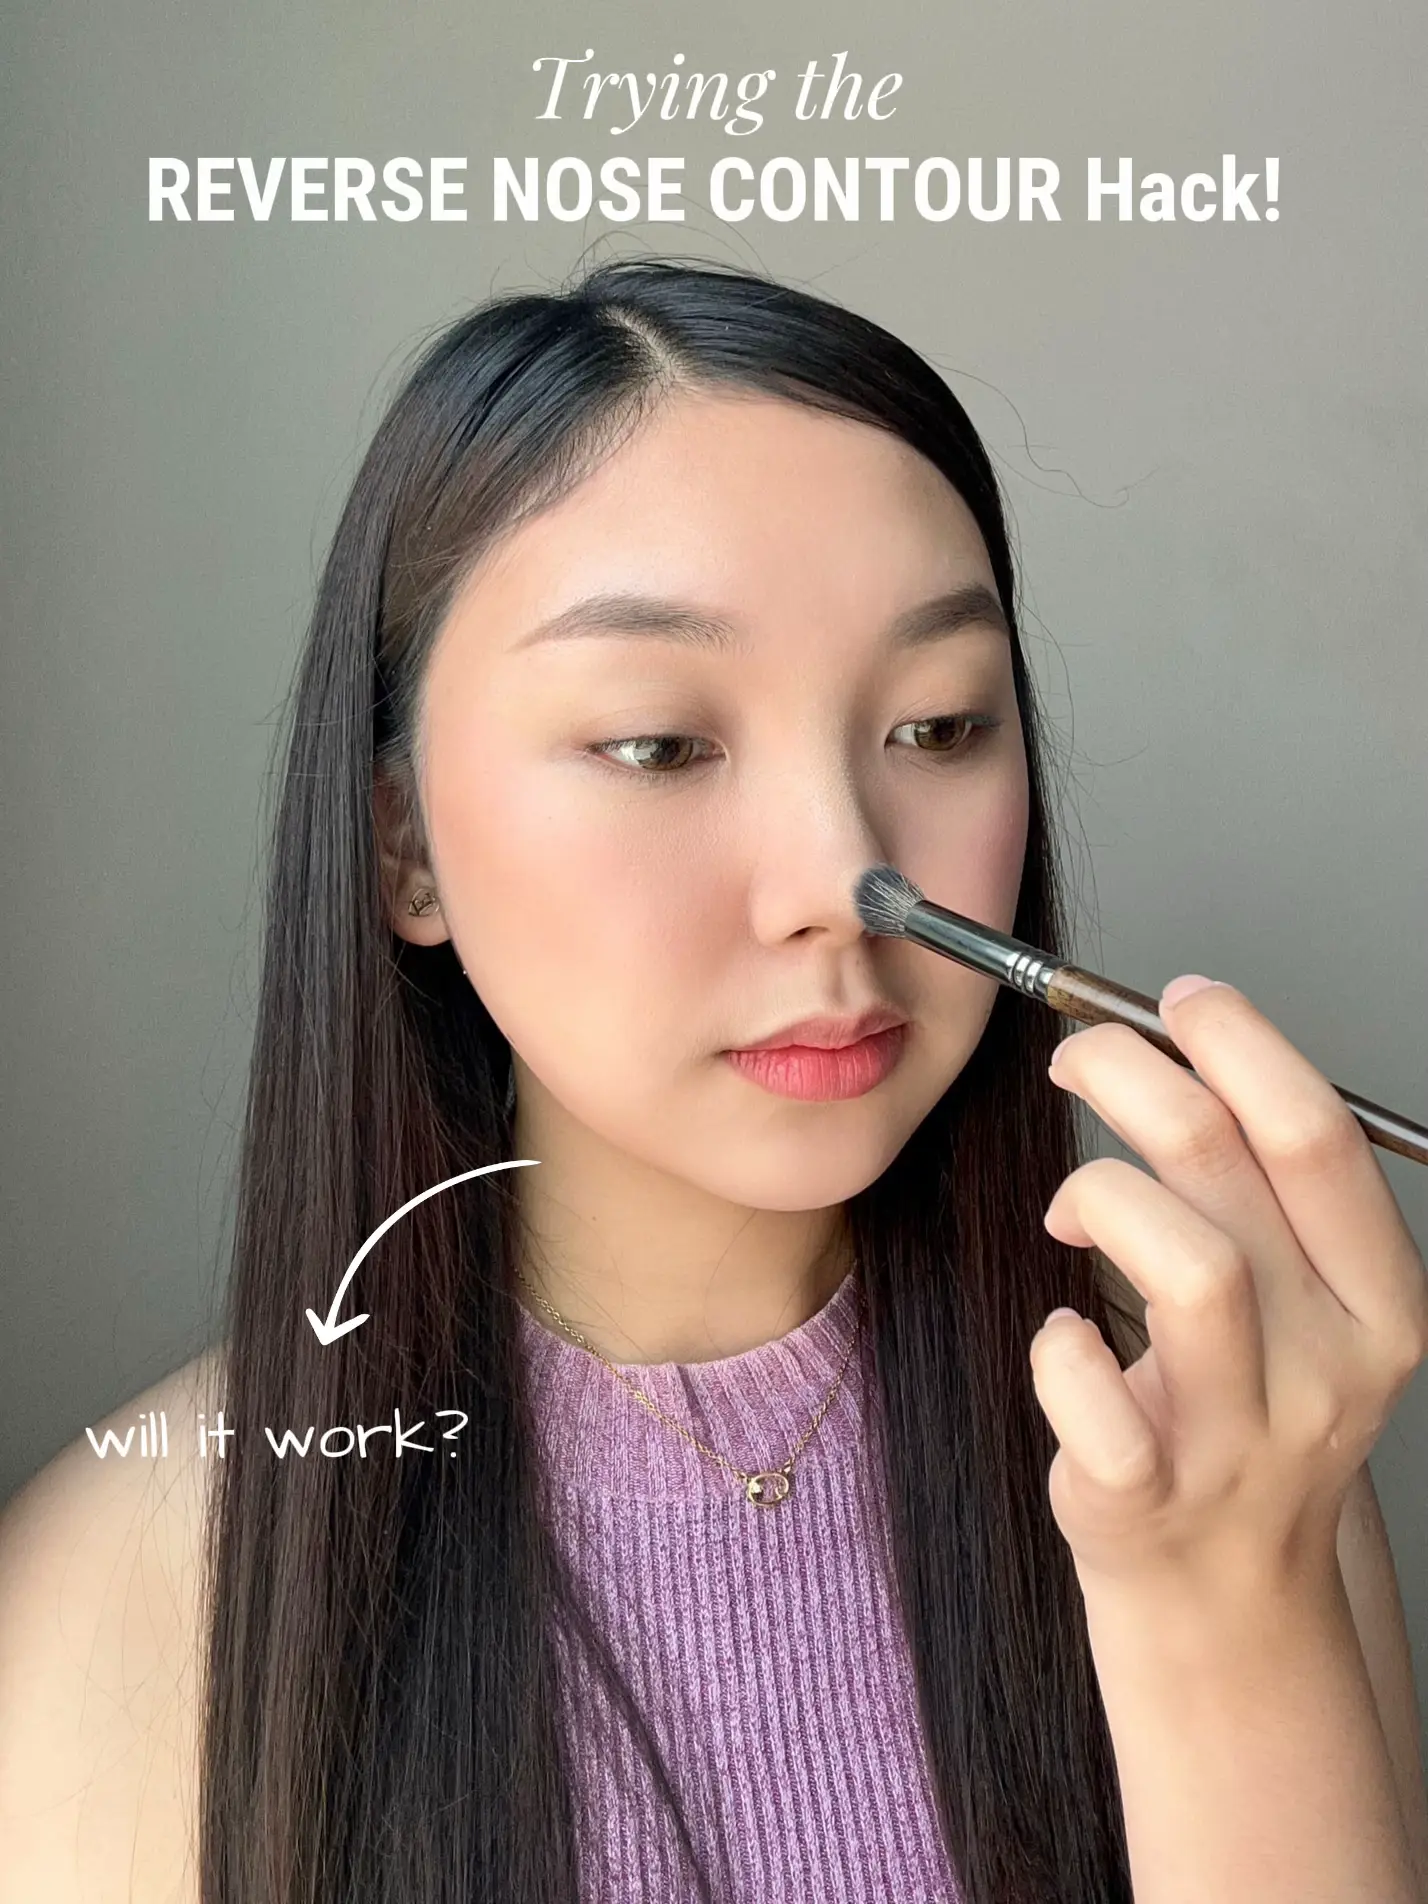 Trying the REVERSE NOSE CONTOUR HACK! 😳, Gallery posted by Vee